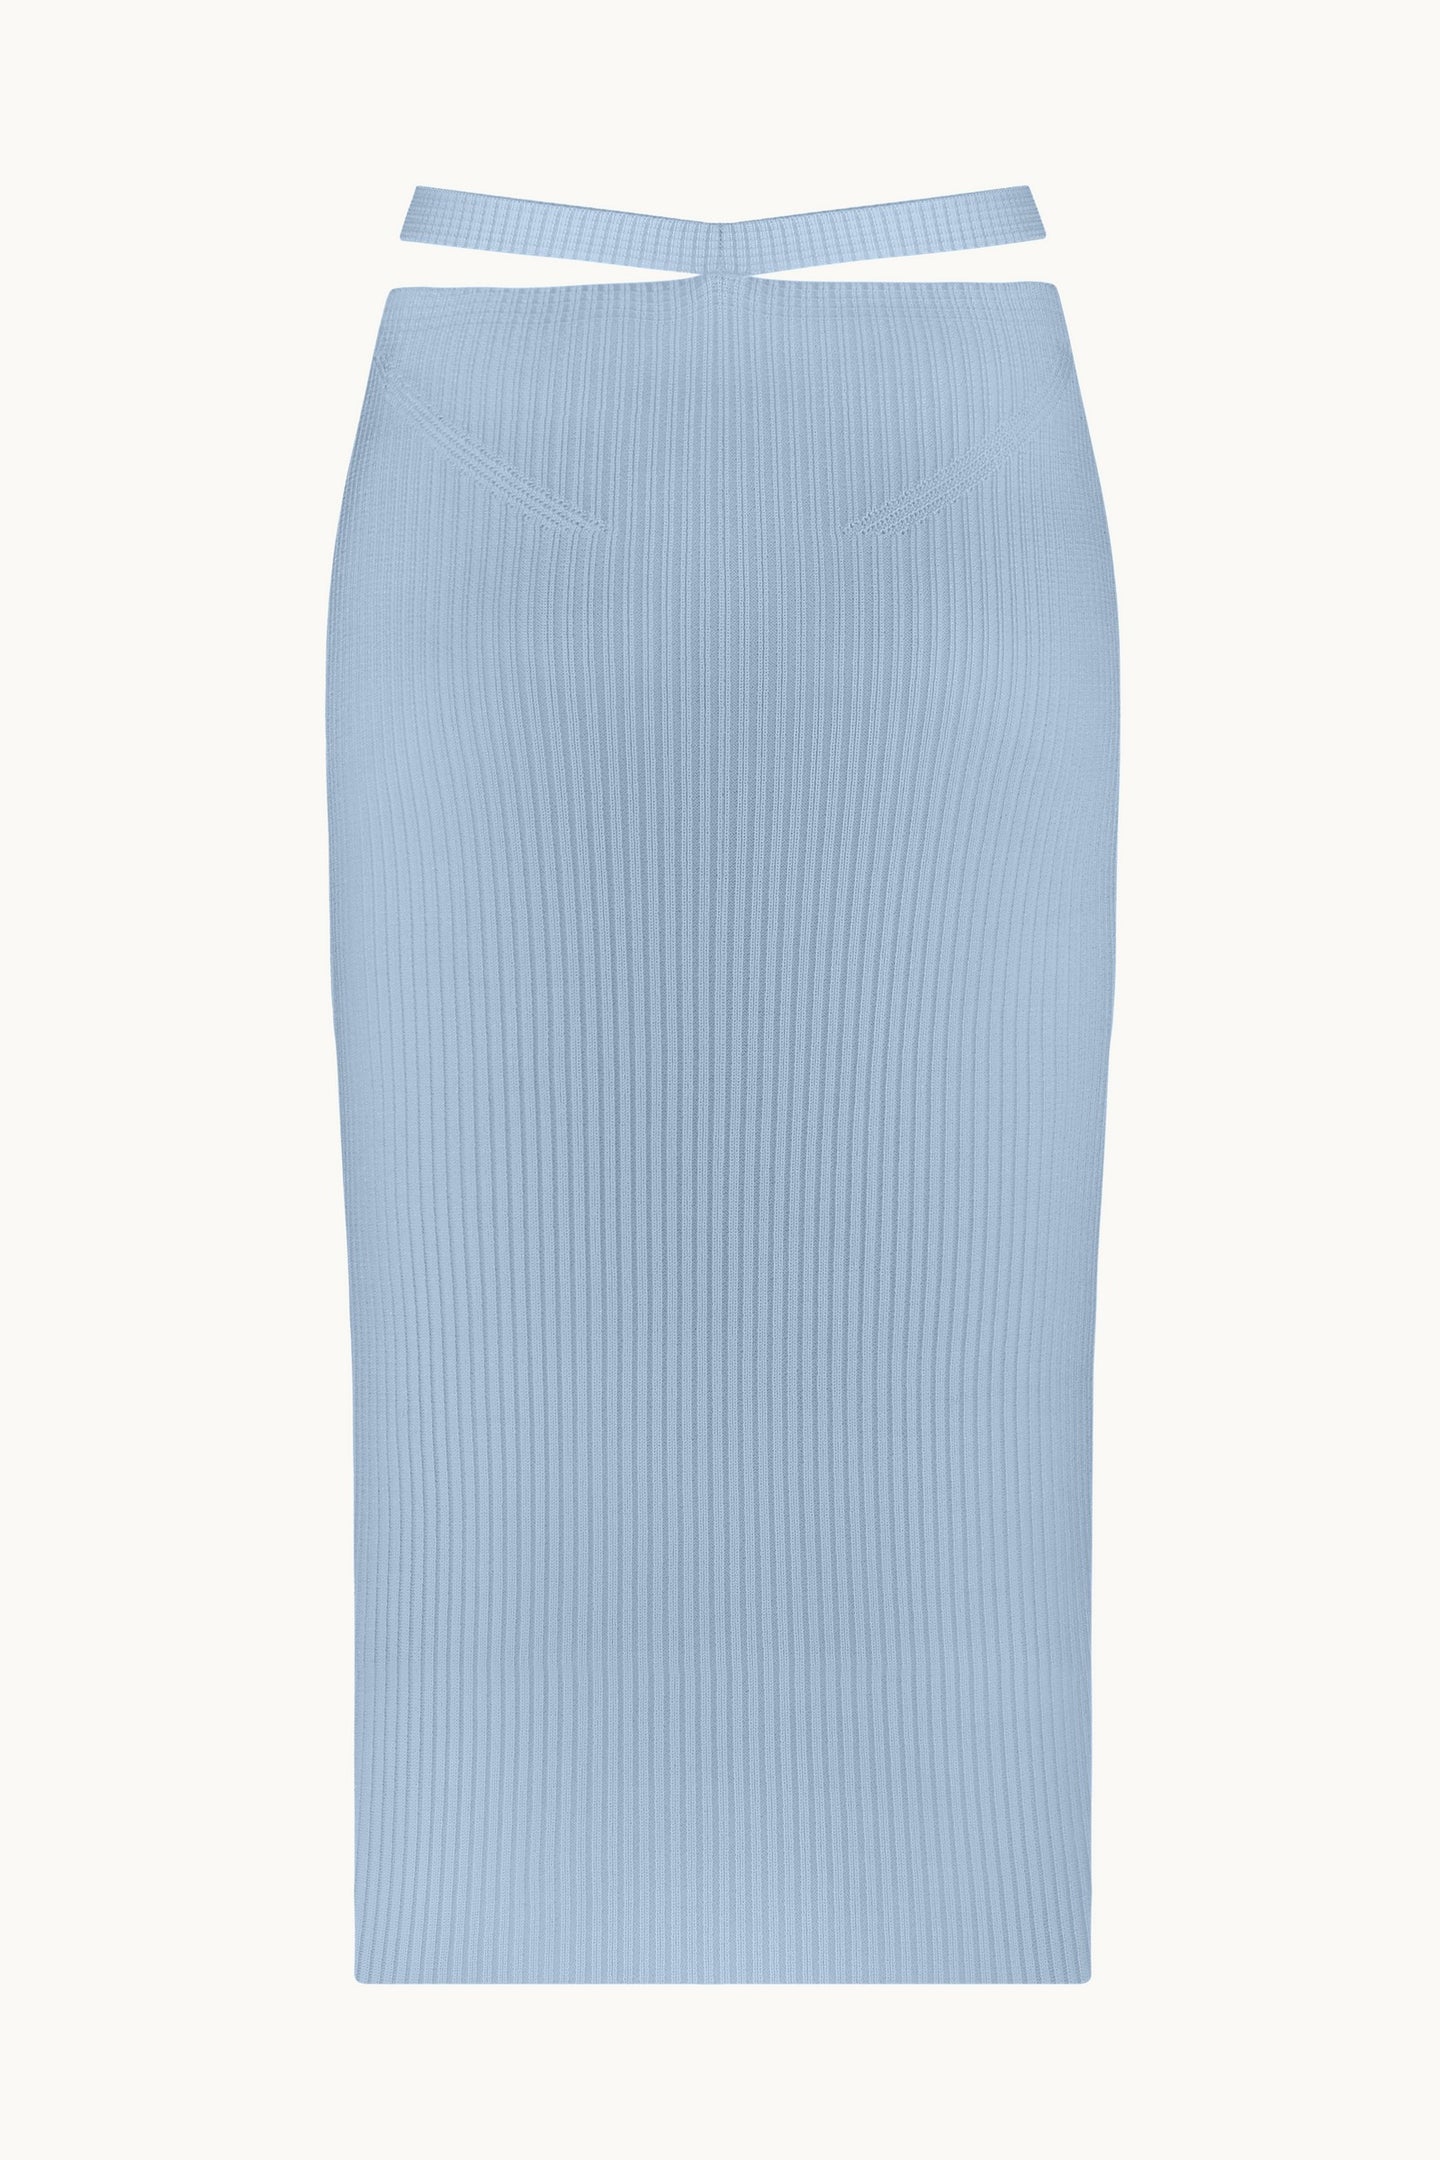 Alizee baby blue skirt back view